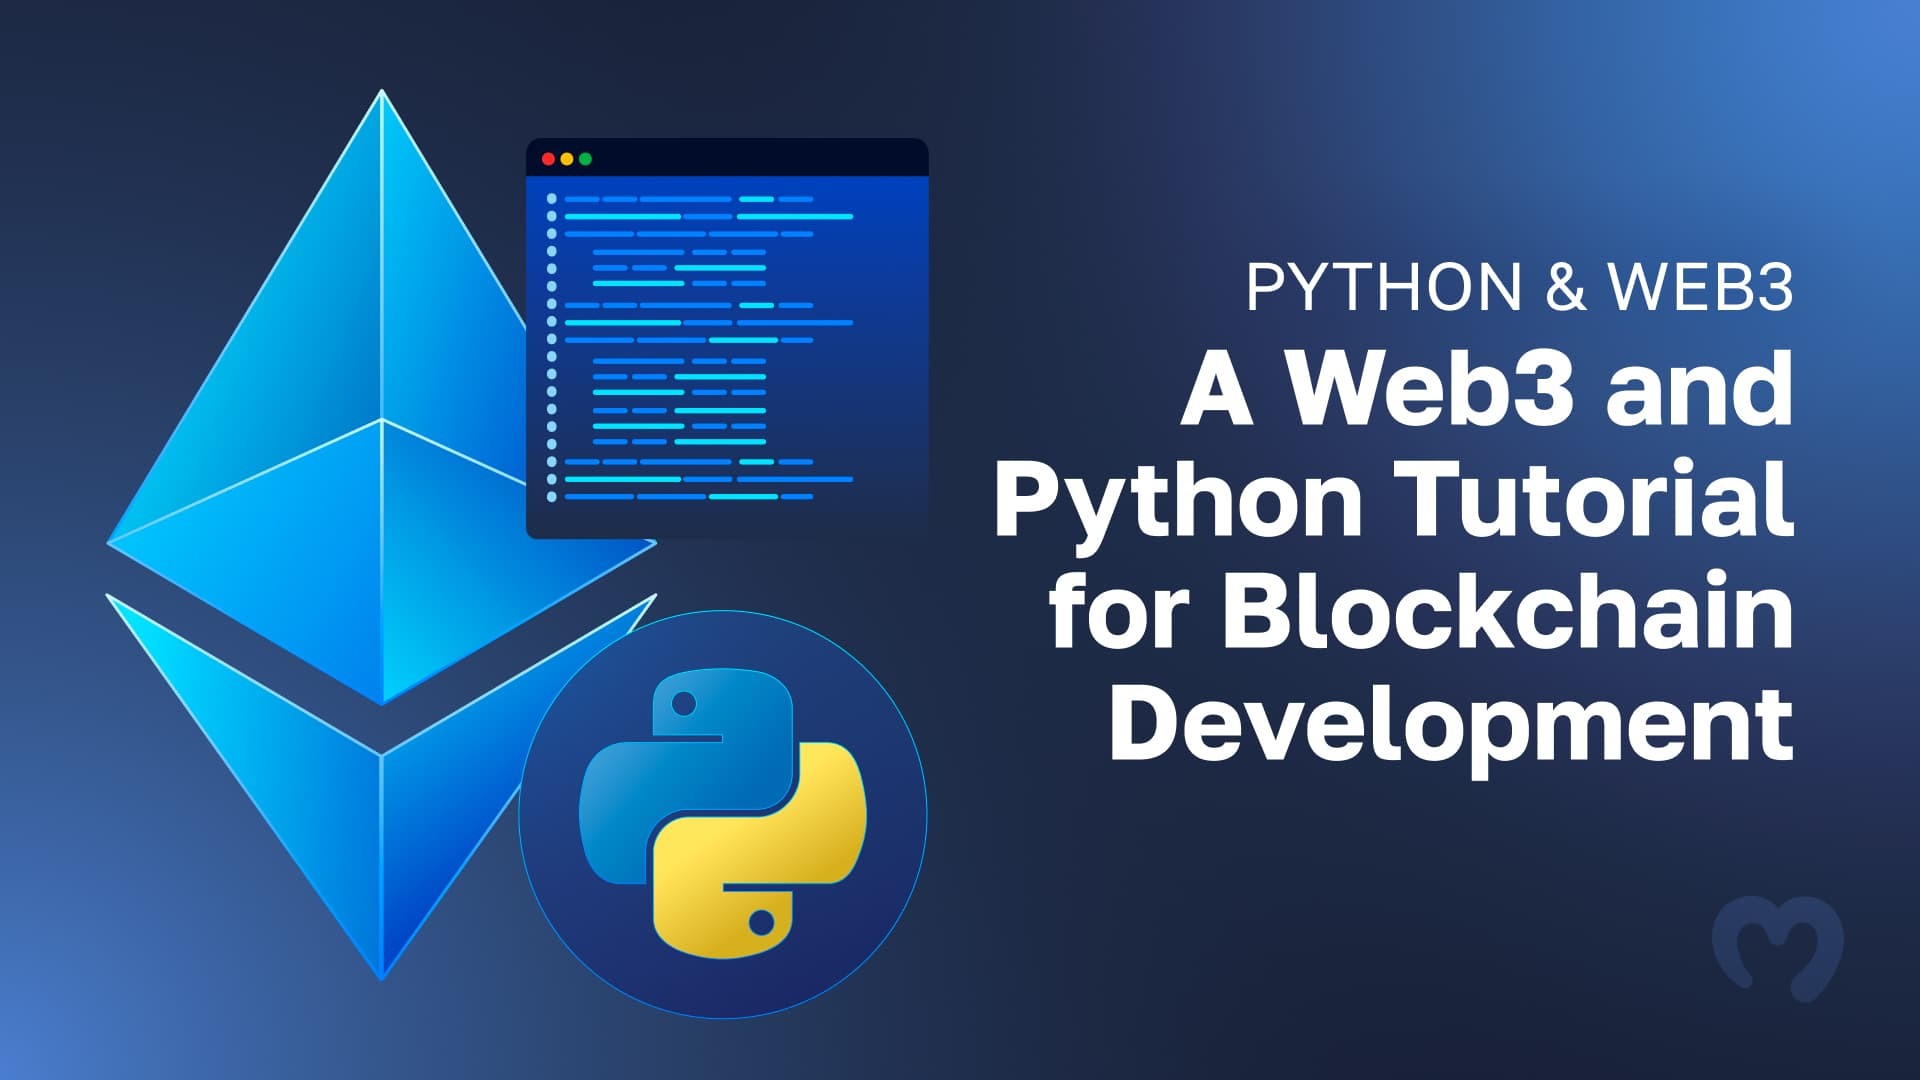 Exploring Python and Web3 and how blockchain developers can combine Web3 and Python.